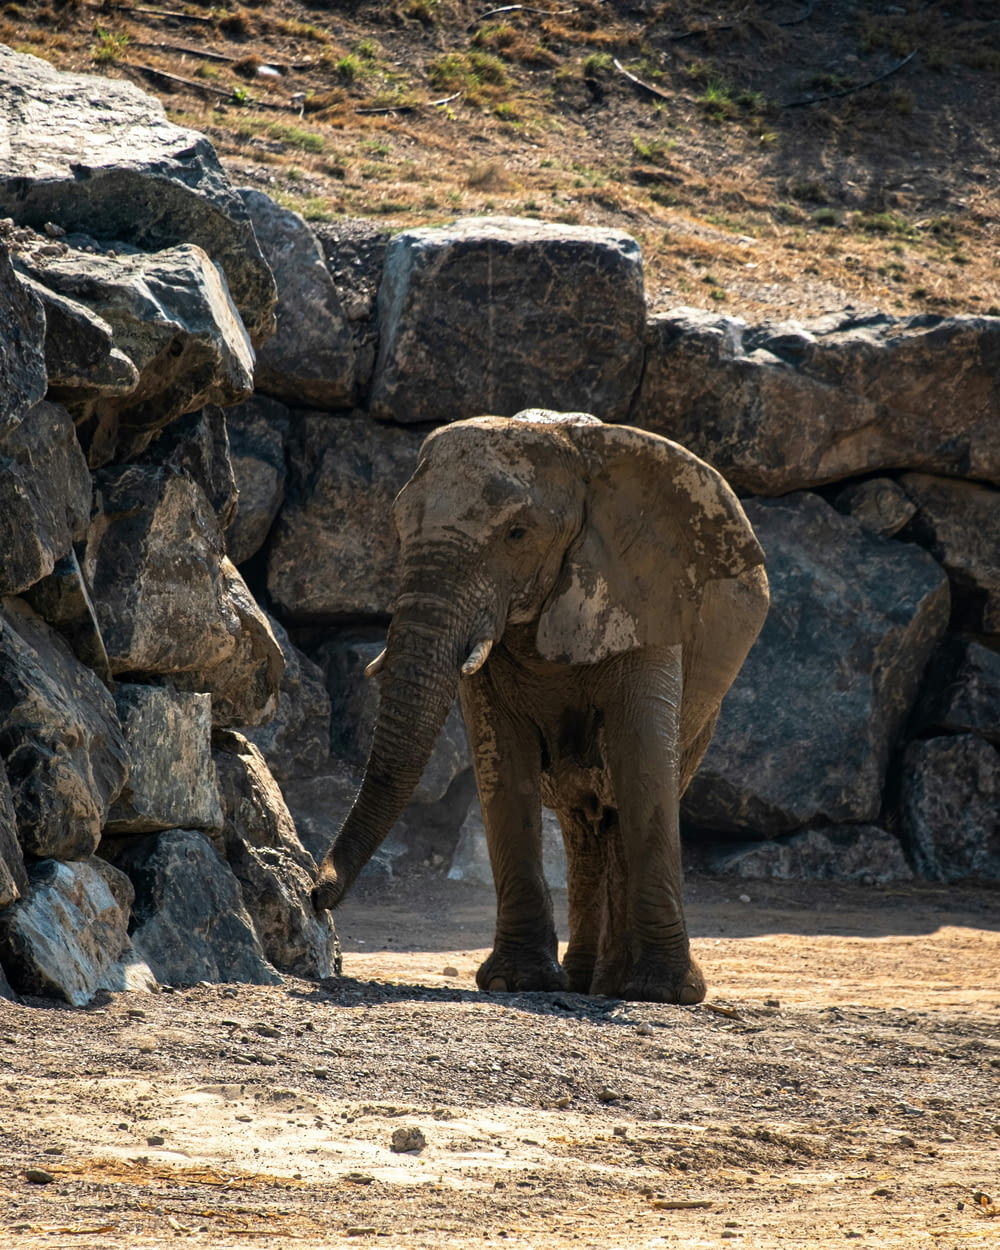 an elephant standing next to a pile of rocks